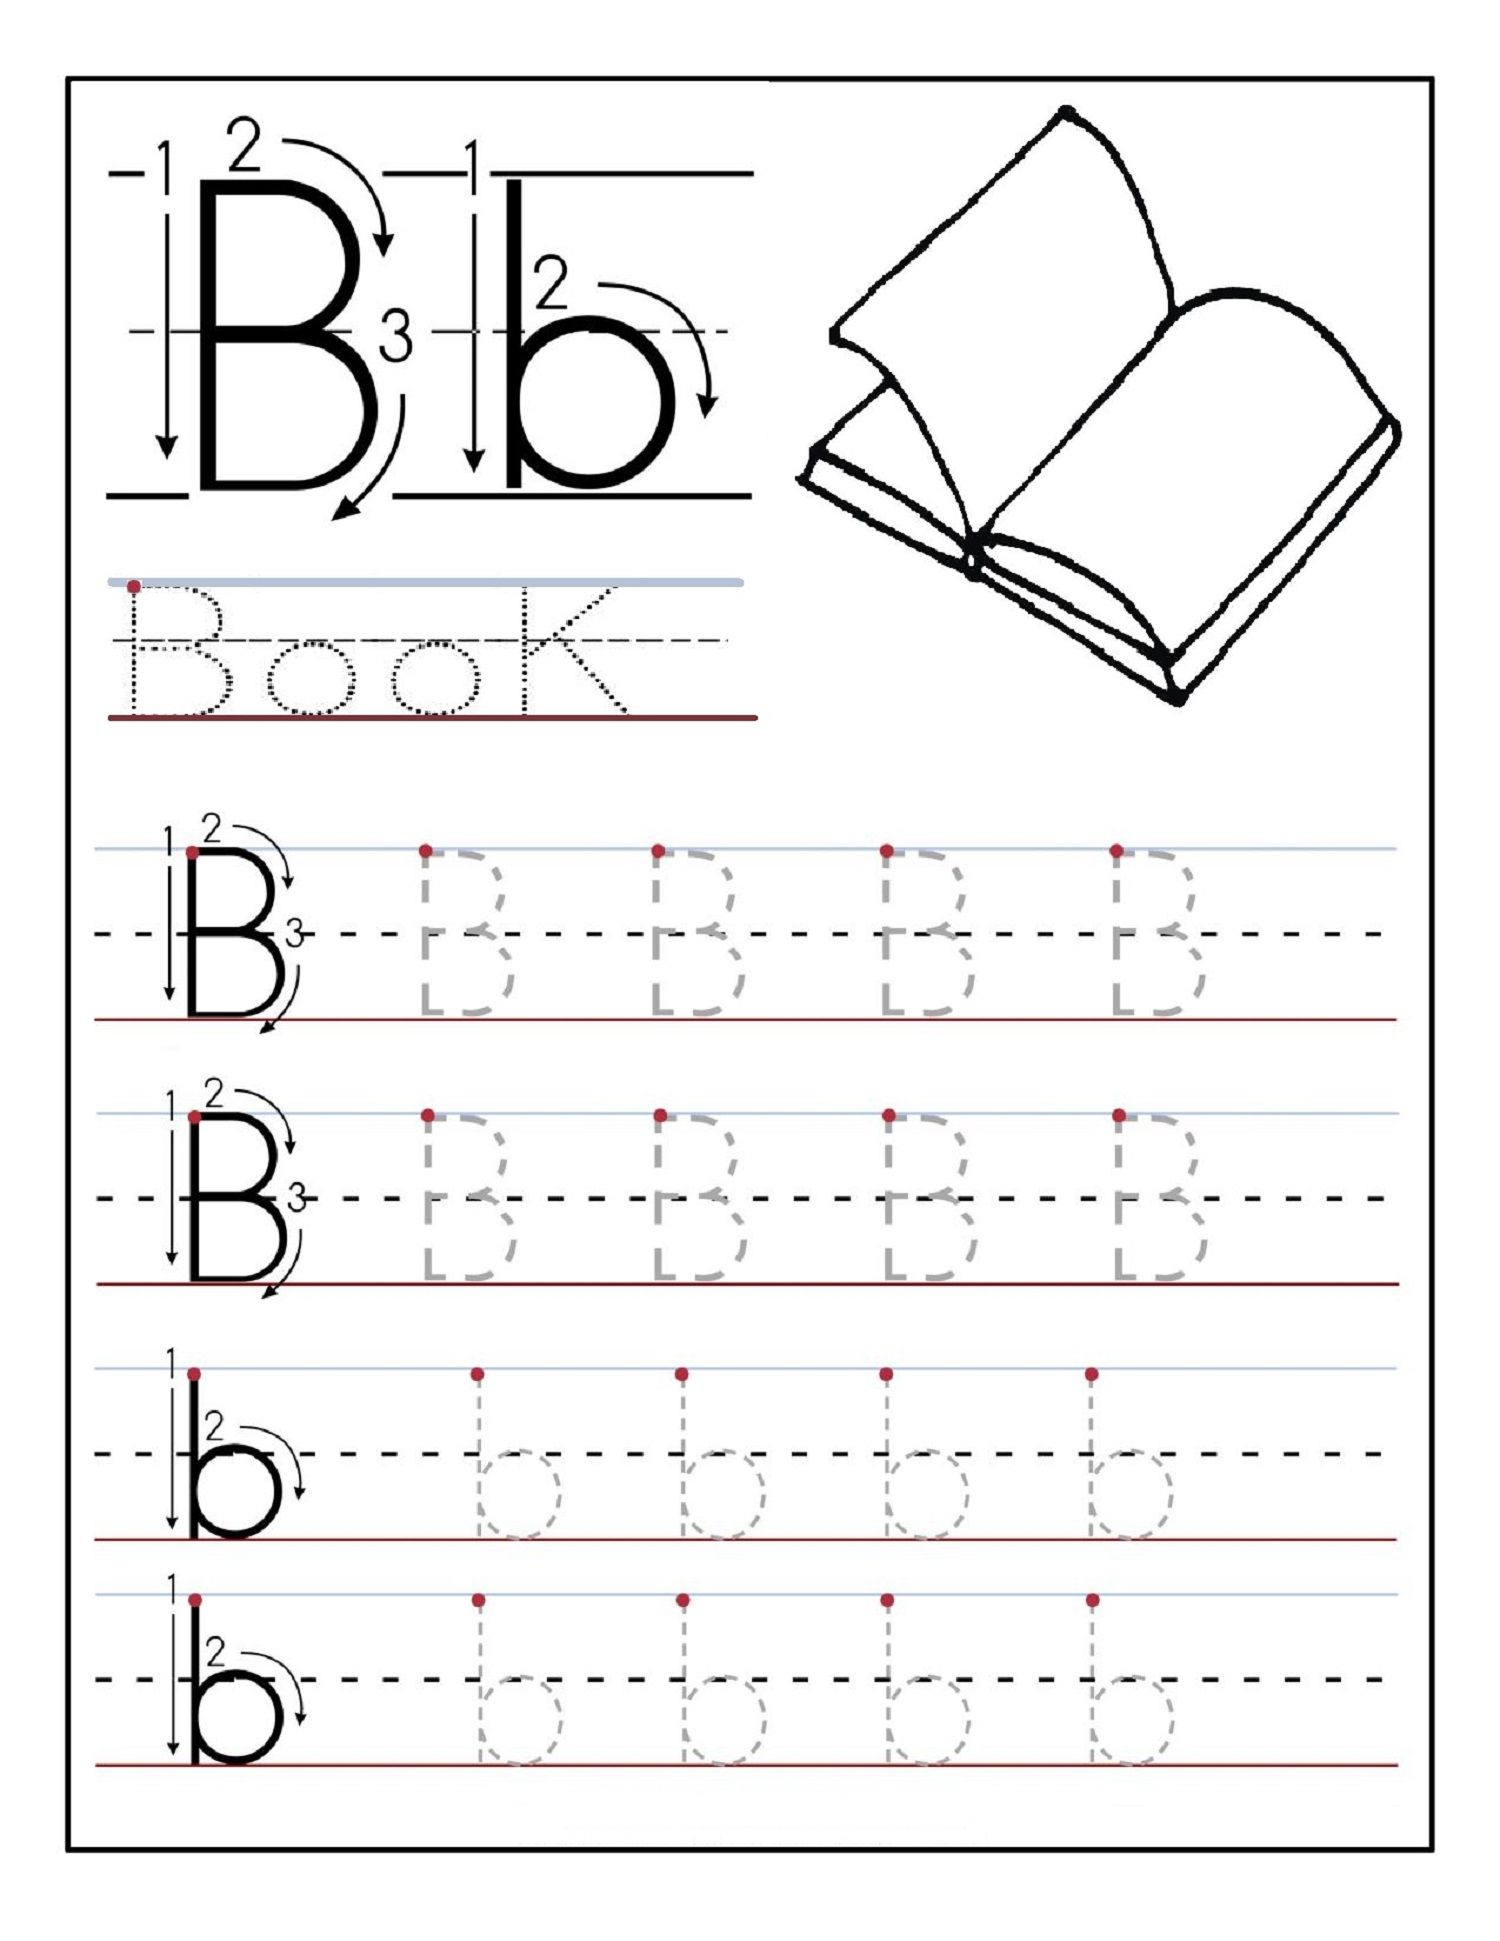 Alphabet Tracing Printables Best For Writing Introduction | Free Printable Letter Writing Worksheets